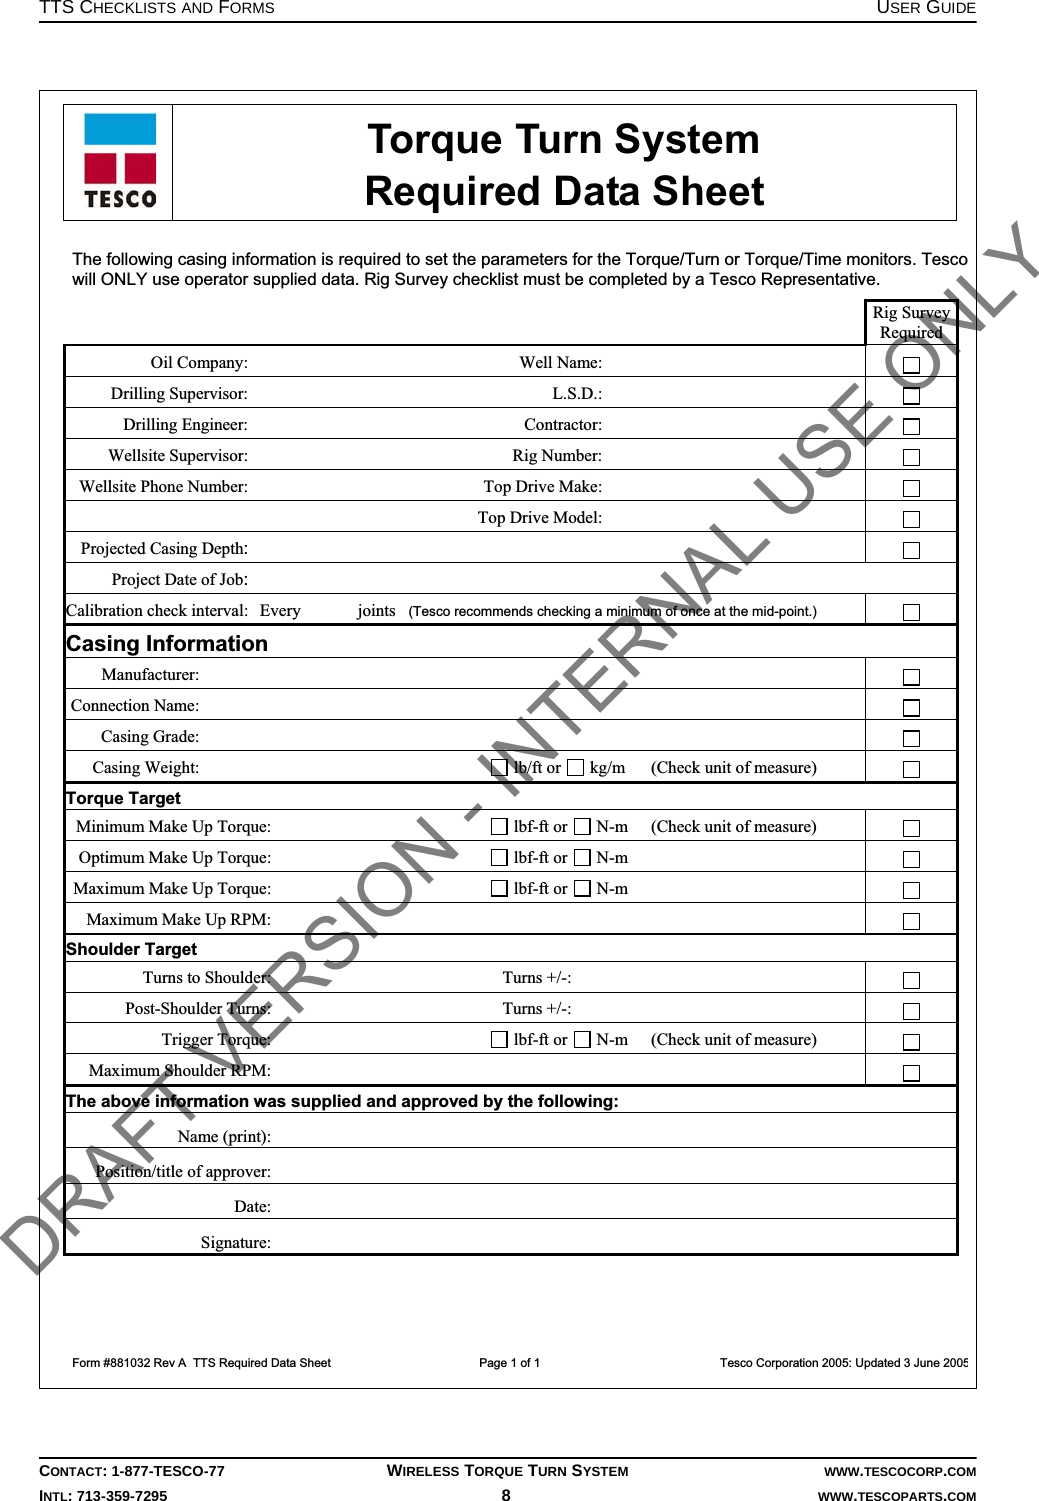 TTS CHECKLISTS AND FORMS USER GUIDECONTACT: 1-877-TESCO-77 WIRELESS TORQUE TURN SYSTEM WWW.TESCOCORP.COMINTL: 713-359-7295 8   WWW.TESCOPARTS.COM  Torque Turn System  Required Data Sheet  Form #881032 Rev A  TTS Required Data Sheet                  Page 1 of 1                                                      Tesco Corporation 2005: Updated 3 June 2005The following casing information is required to set the parameters for the Torque/Turn or Torque/Time monitors. Tescowill ONLY use operator supplied data. Rig Survey checklist must be completed by a Tesco Representative.    Rig Survey Required Oil Company:        Well Name:         Drilling Supervisor:        L.S.D.:         Drilling Engineer:        Contractor:         Wellsite Supervisor:        Rig Number:         Wellsite Phone Number:        Top Drive Make:            Top Drive Model:         Projected Casing Depth:         Project Date of Job:        Calibration check interval:  Every       joints   (Tesco recommends checking a minimum of once at the mid-point.)  Casing Information Manufacturer:         Connection Name:         Casing Grade:         Casing Weight:         lb/ft or   kg/m (Check unit of measure)   Torque Target Minimum Make Up Torque:         lbf-ft or   N-m (Check unit of measure)  Optimum Make Up Torque:         lbf-ft or   N-m    Maximum Make Up Torque:         lbf-ft or   N-m    Maximum Make Up RPM:             Shoulder Target Turns to Shoulder:        Turns +/-:         Post-Shoulder Turns:        Turns +/-:          Trigger Torque:         lbf-ft or   N-m (Check unit of measure)   Maximum Shoulder RPM:             The above information was supplied and approved by the following: Name (print):       Position/title of approver:       Date:       Signature:        DRAFT VERSION - INTERNAL USE ONLY